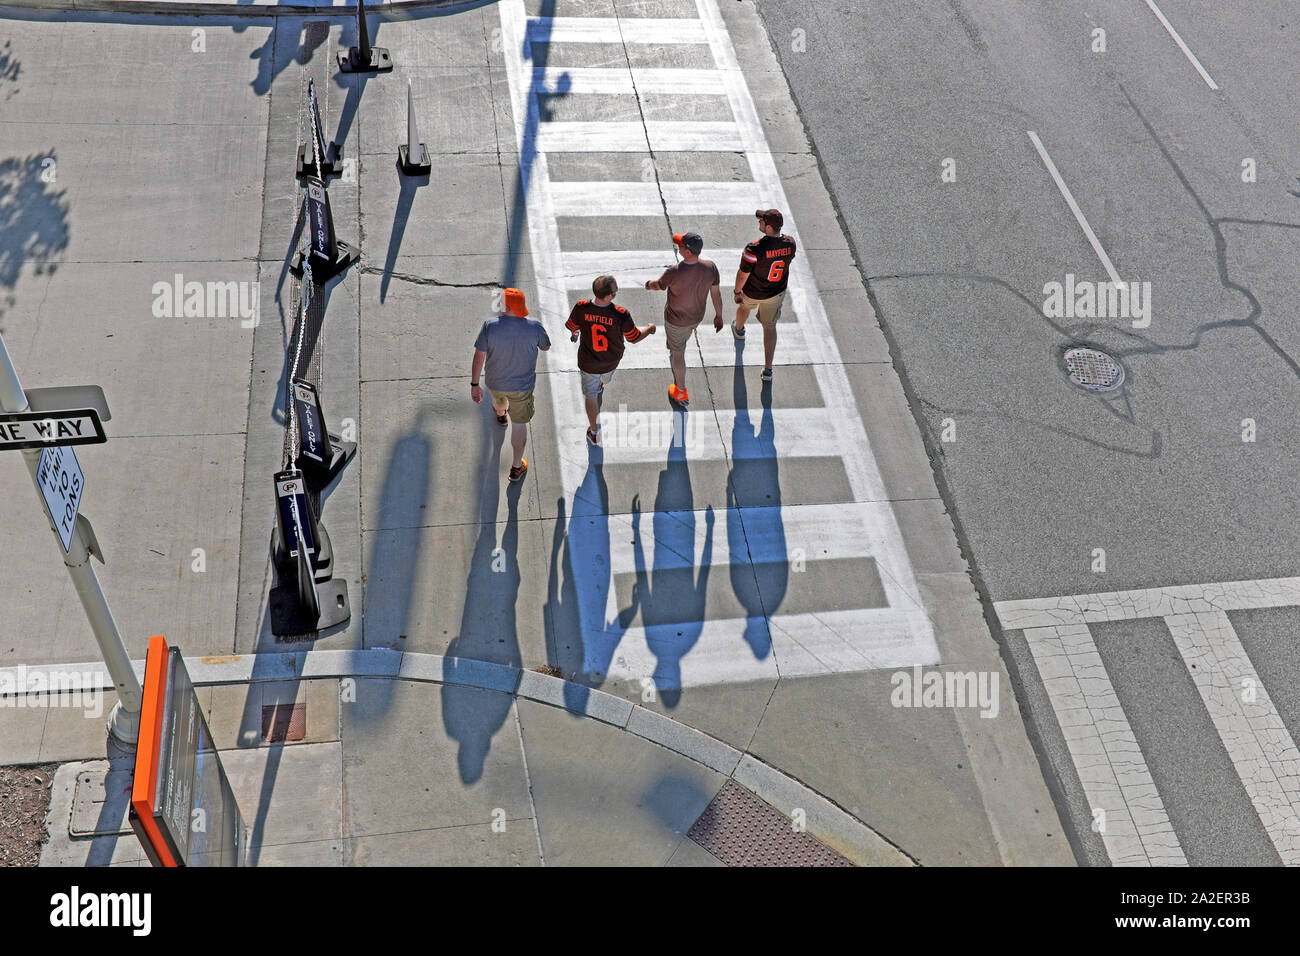 Four Cleveland Browns football fans cross a street prior to a night game casting shadows by the setting sun in downtown Cleveland, Ohio, USA. Stock Photo